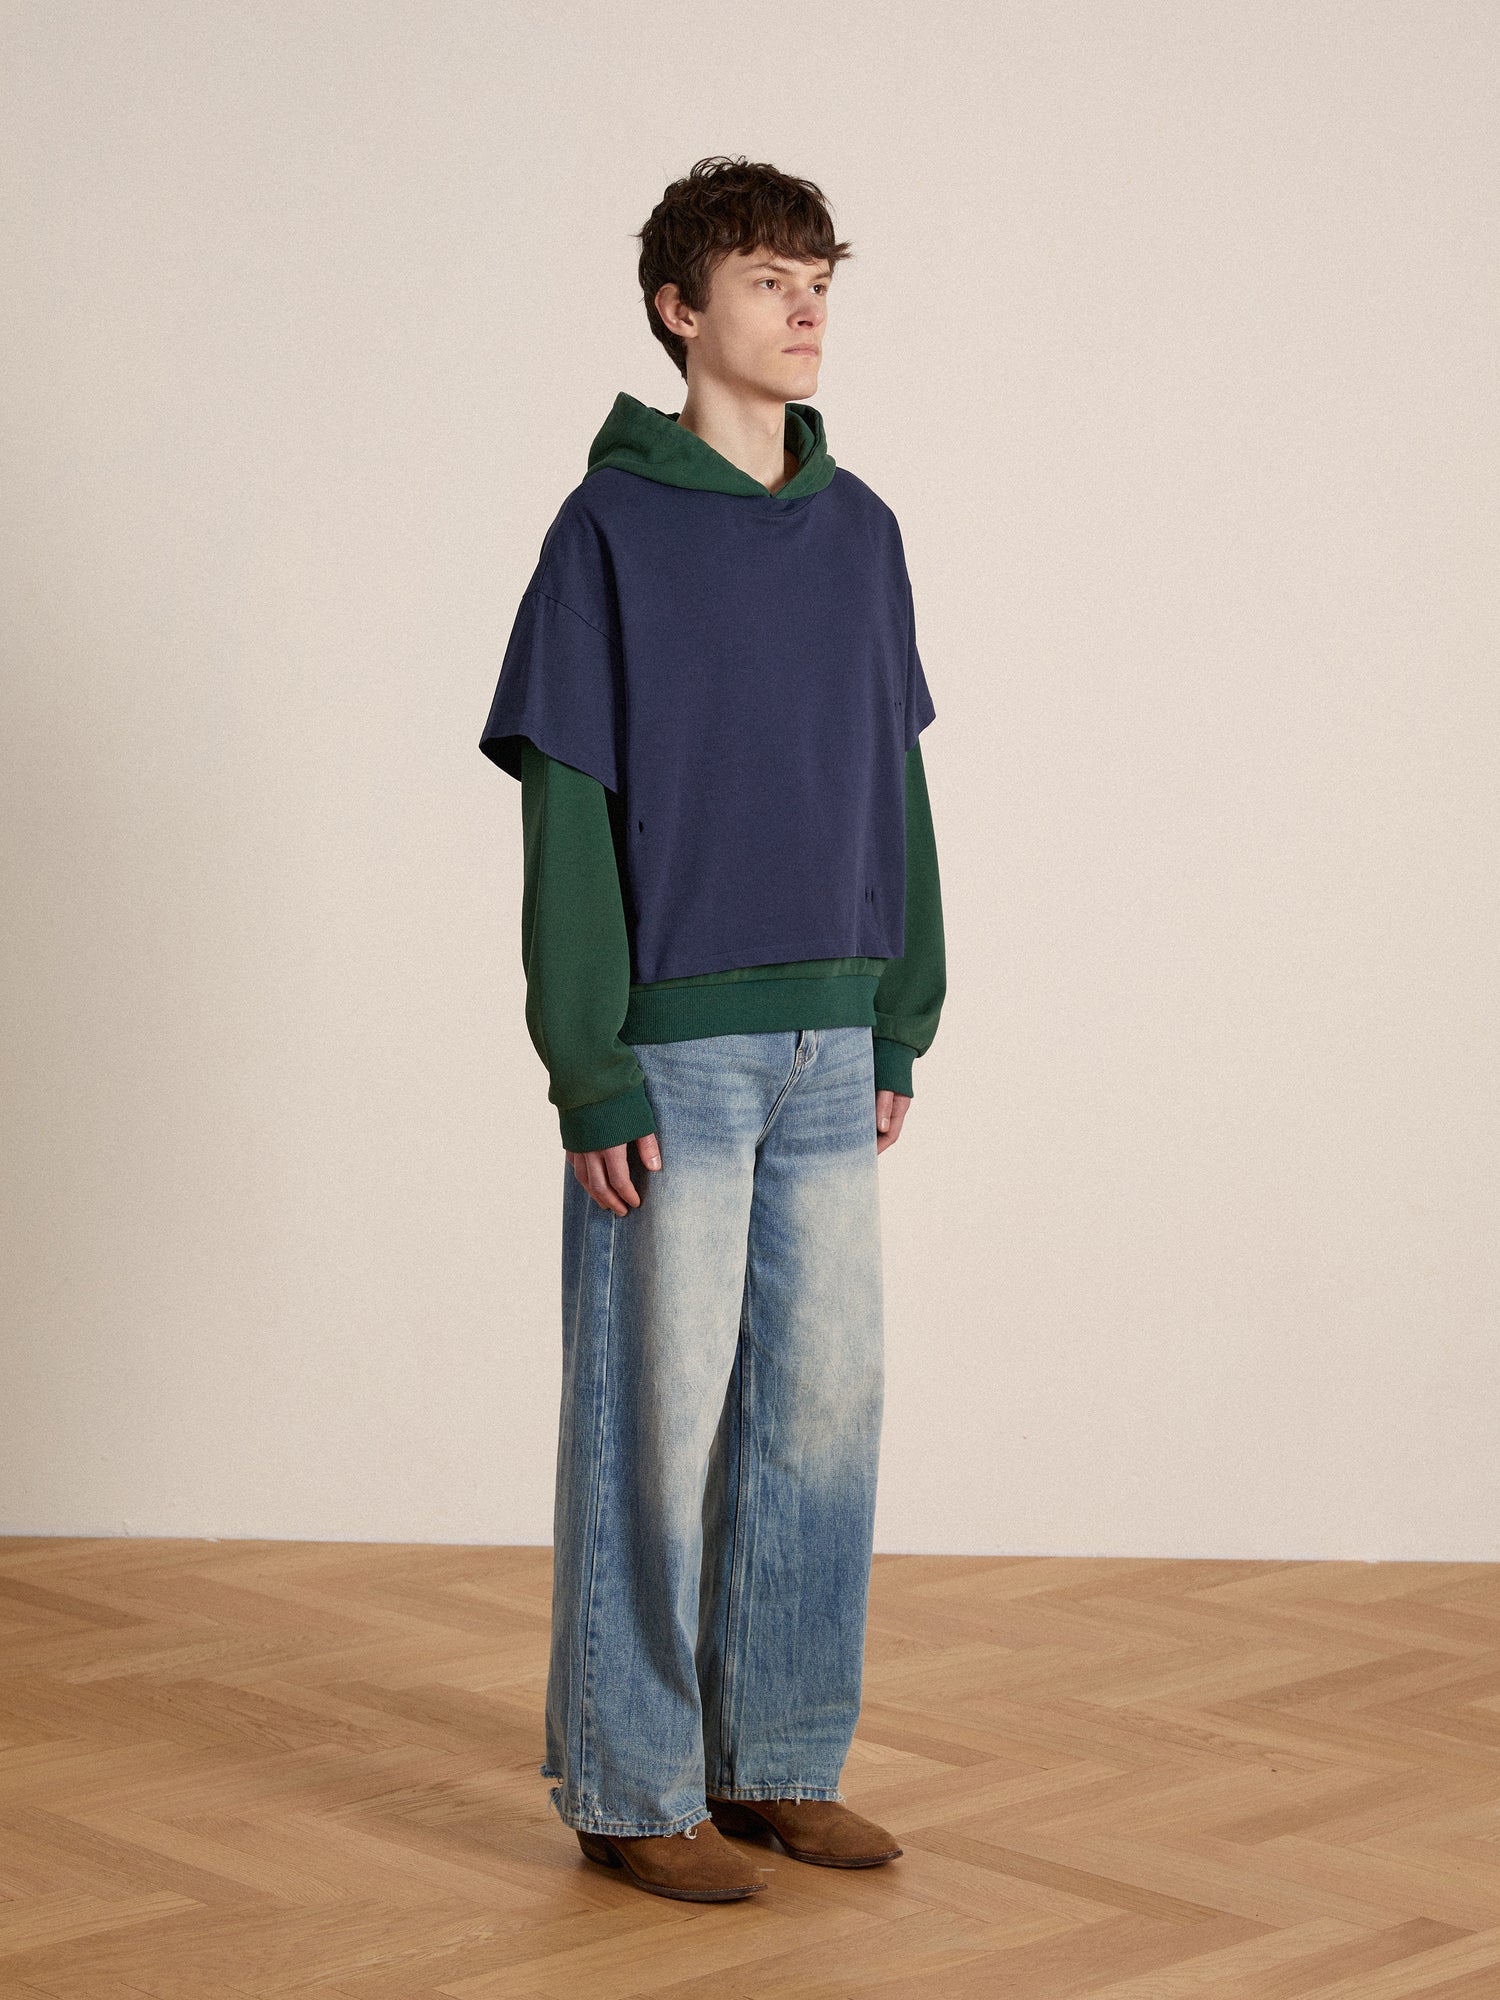 A man wearing Lacy Baggy Jeans and a Found Double Layer Hoodie standing on a wooden floor.